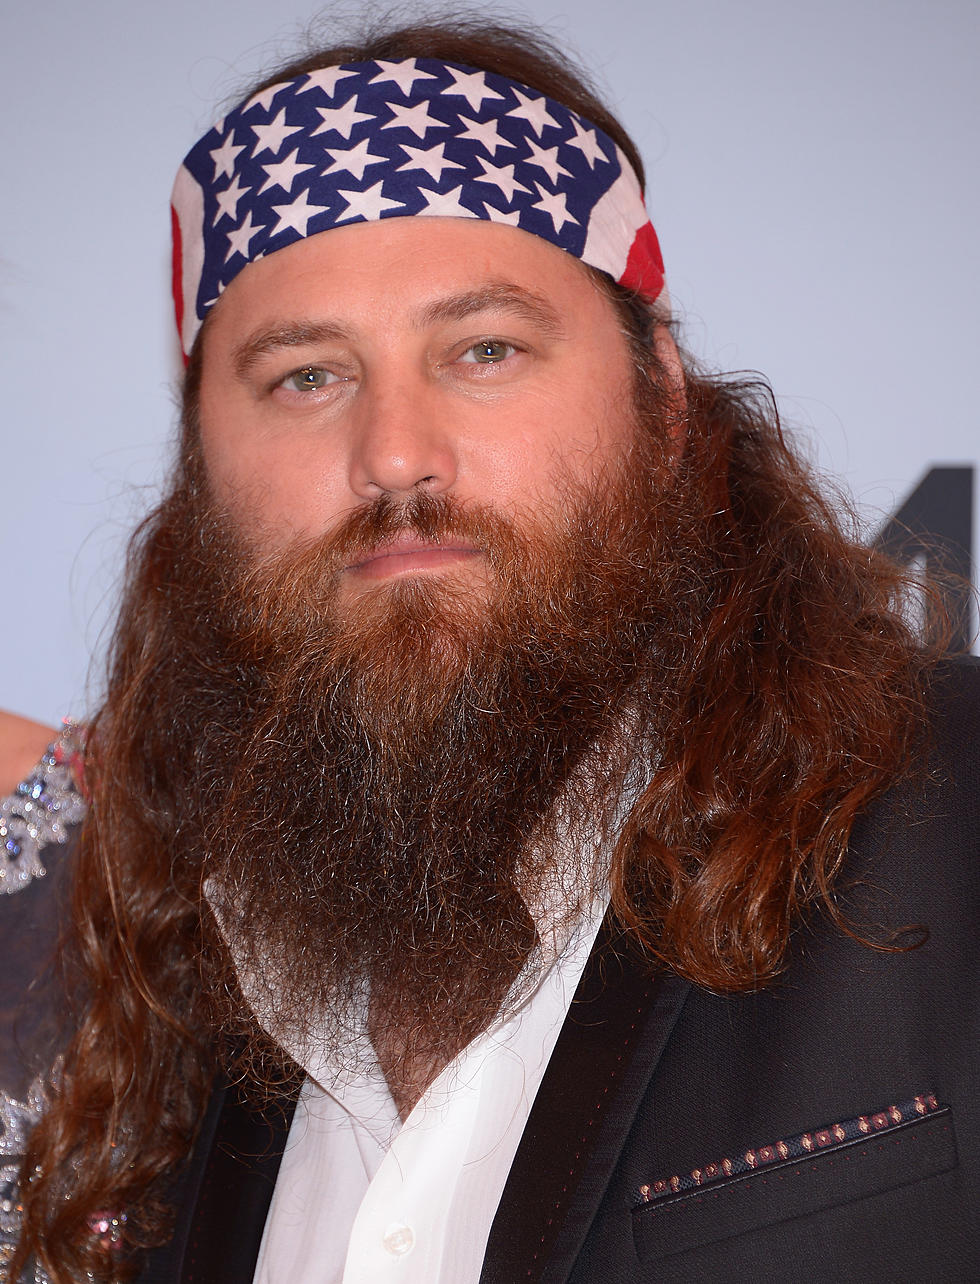 Duck Dynasty Star To Attend “State Of The Union Address”